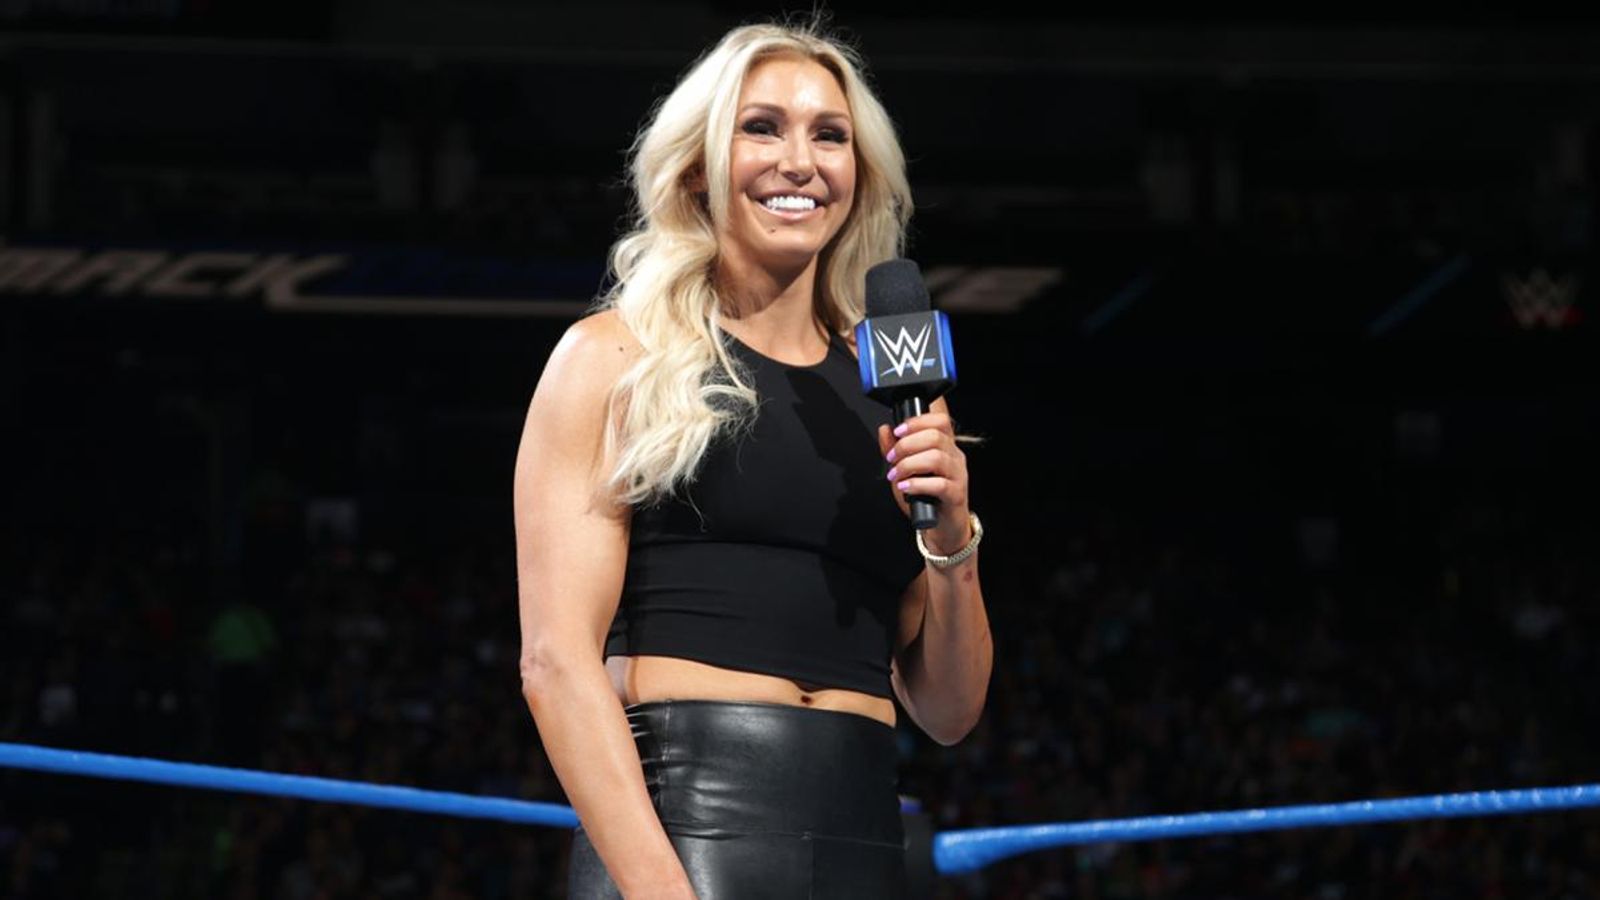 "Charlotte Flair" 
6. "WWE SmackDown" - wide 4